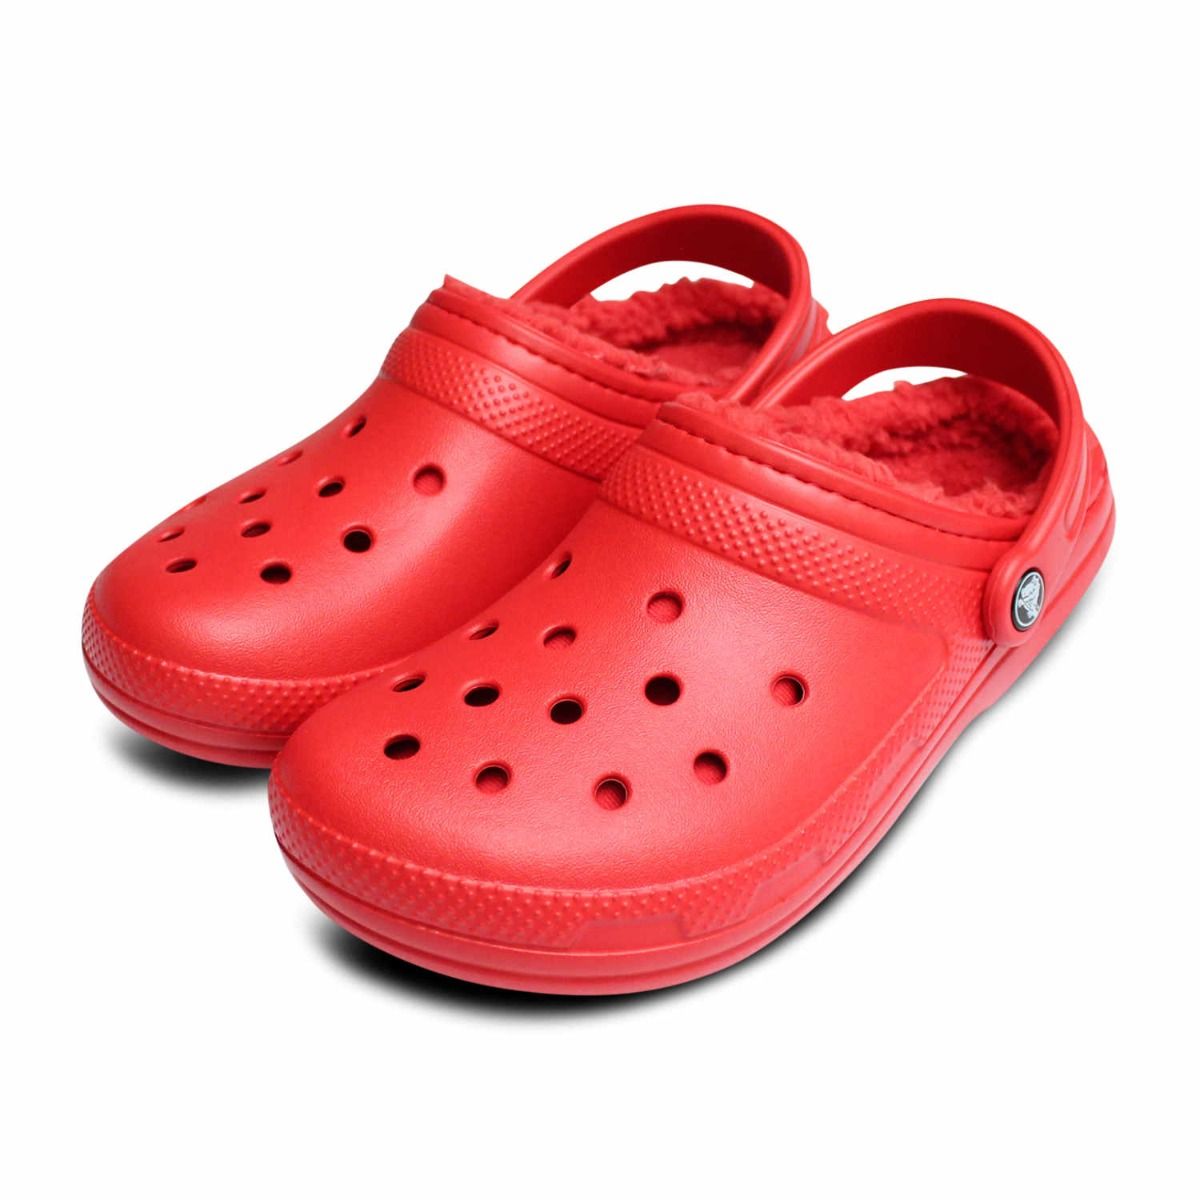 Classic Warm Lined Crocs Clog for Women in Red